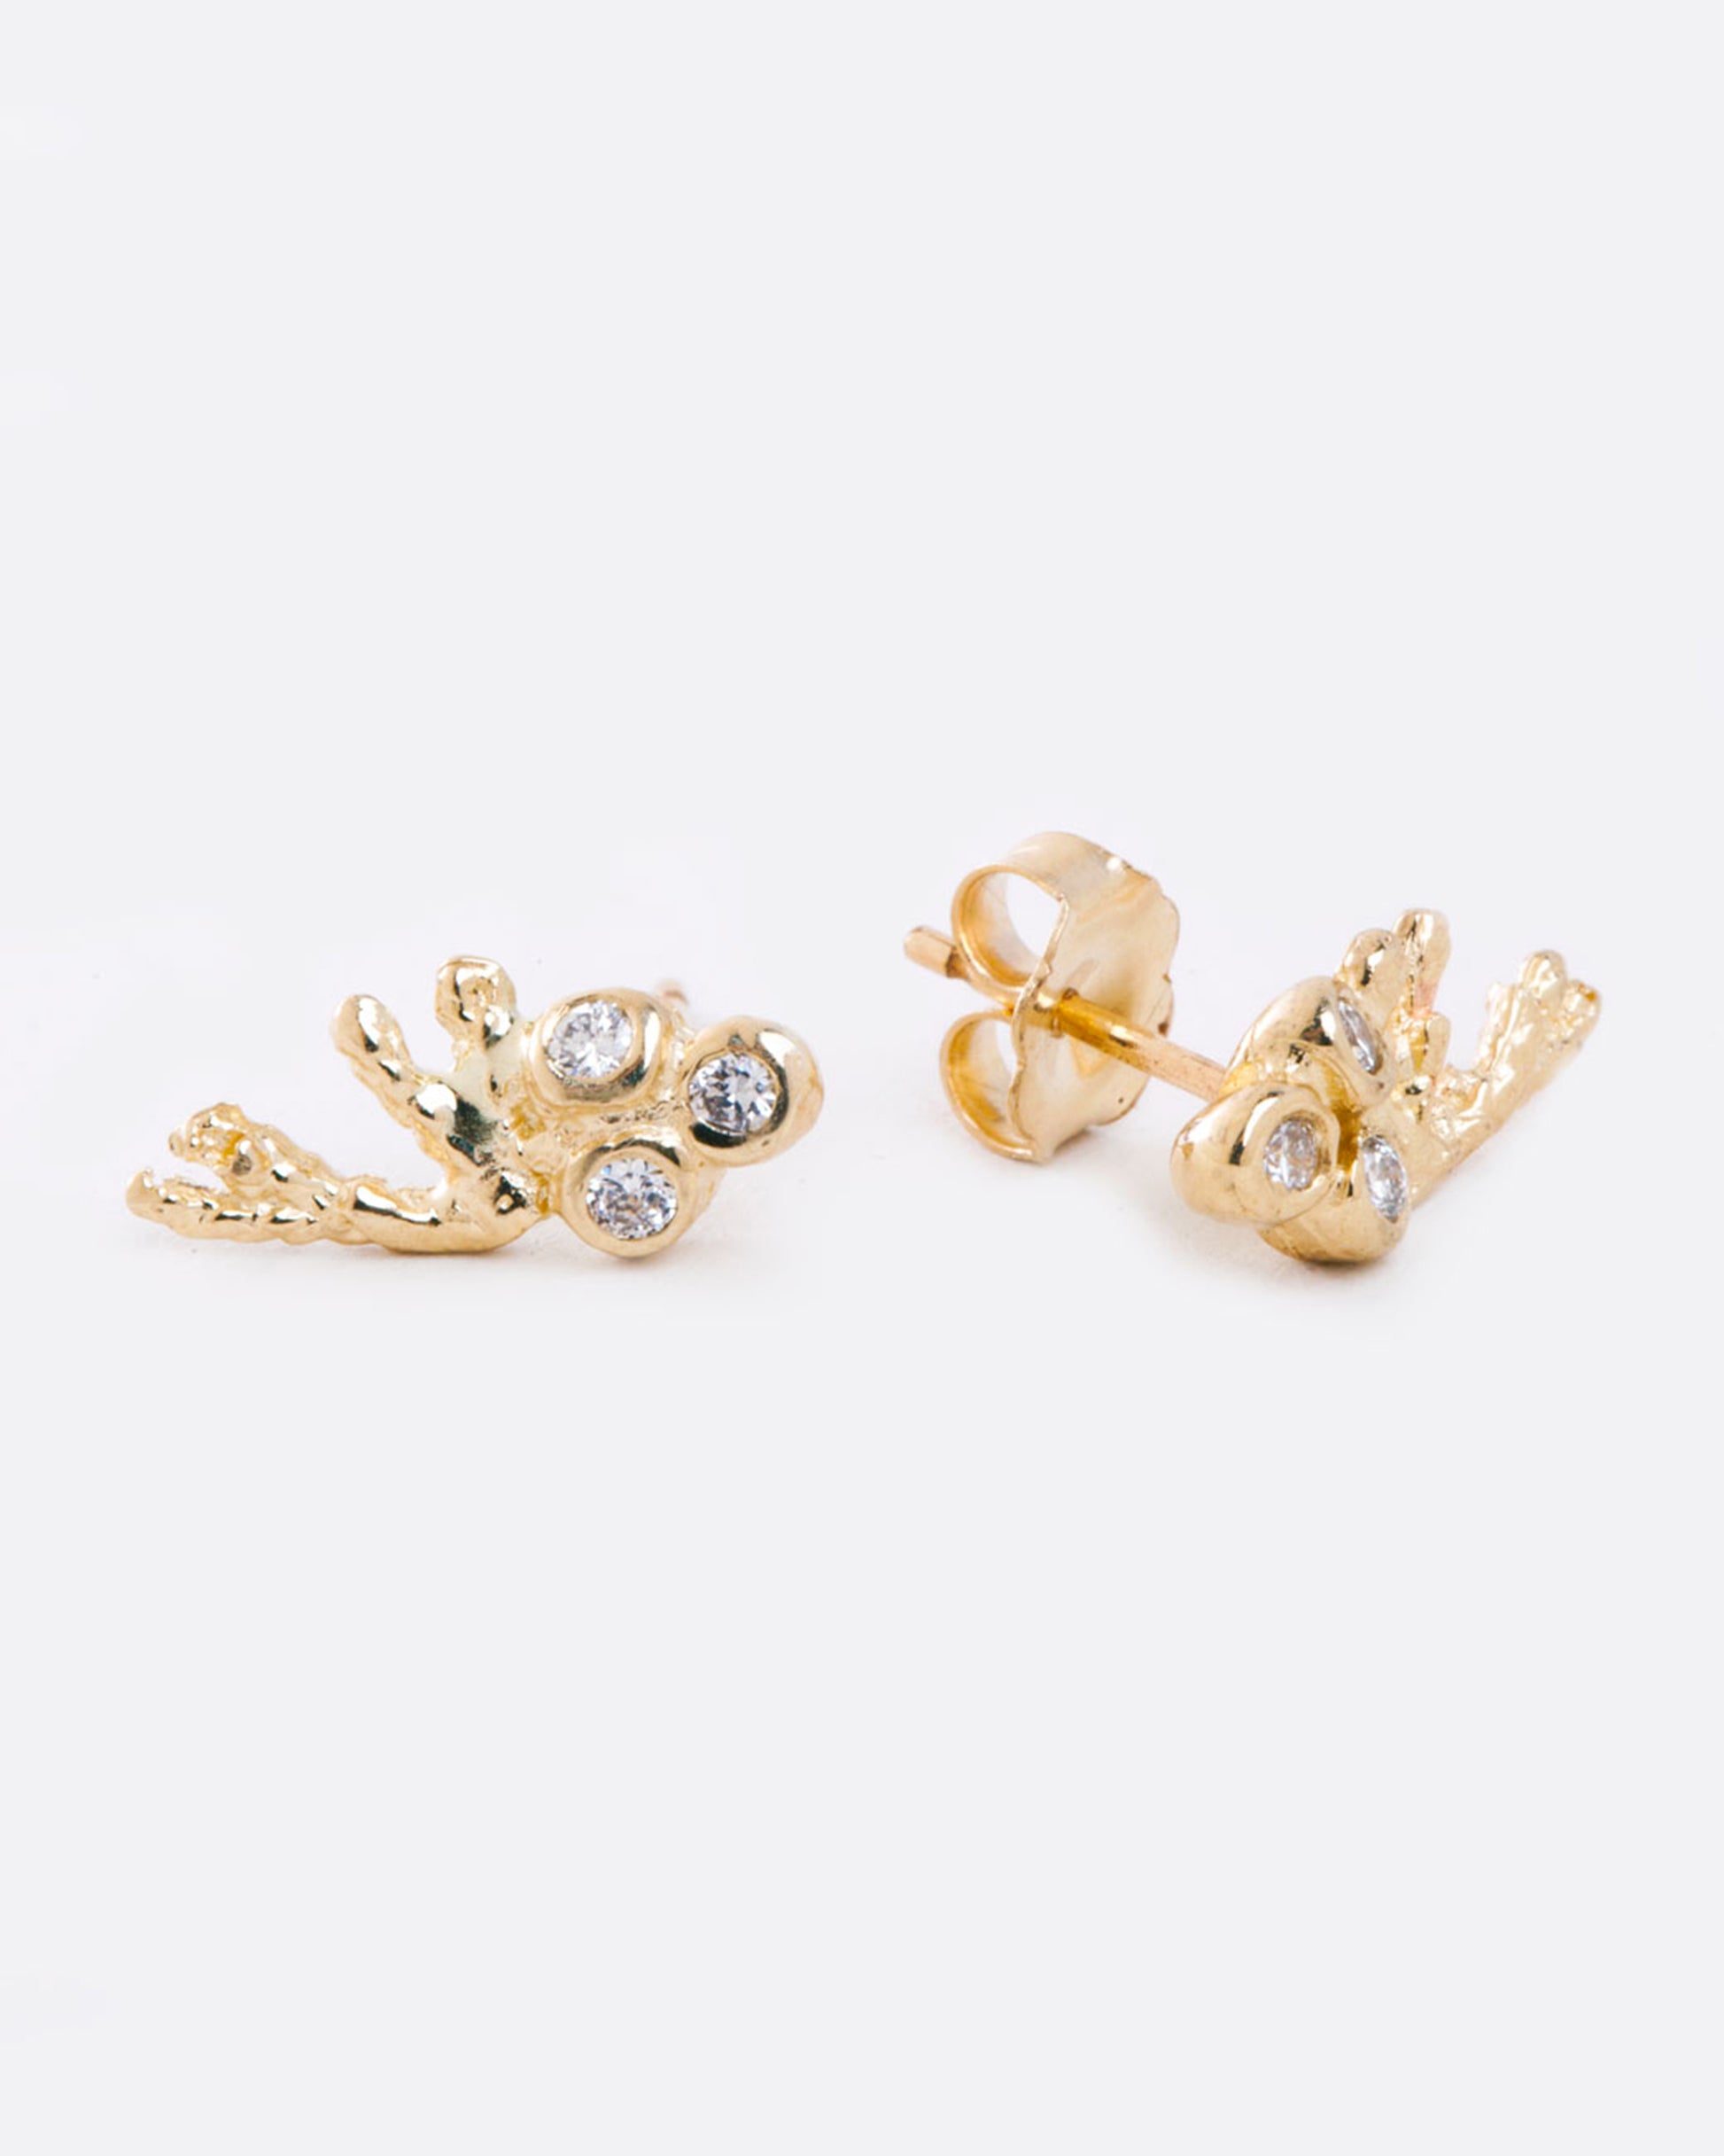 two yellow gold earrings with a trio of diamonds bezel set, and a yellow gold branch extending to the side. the earring on the right is on a 45 degree angle and shows the butterfly backing.